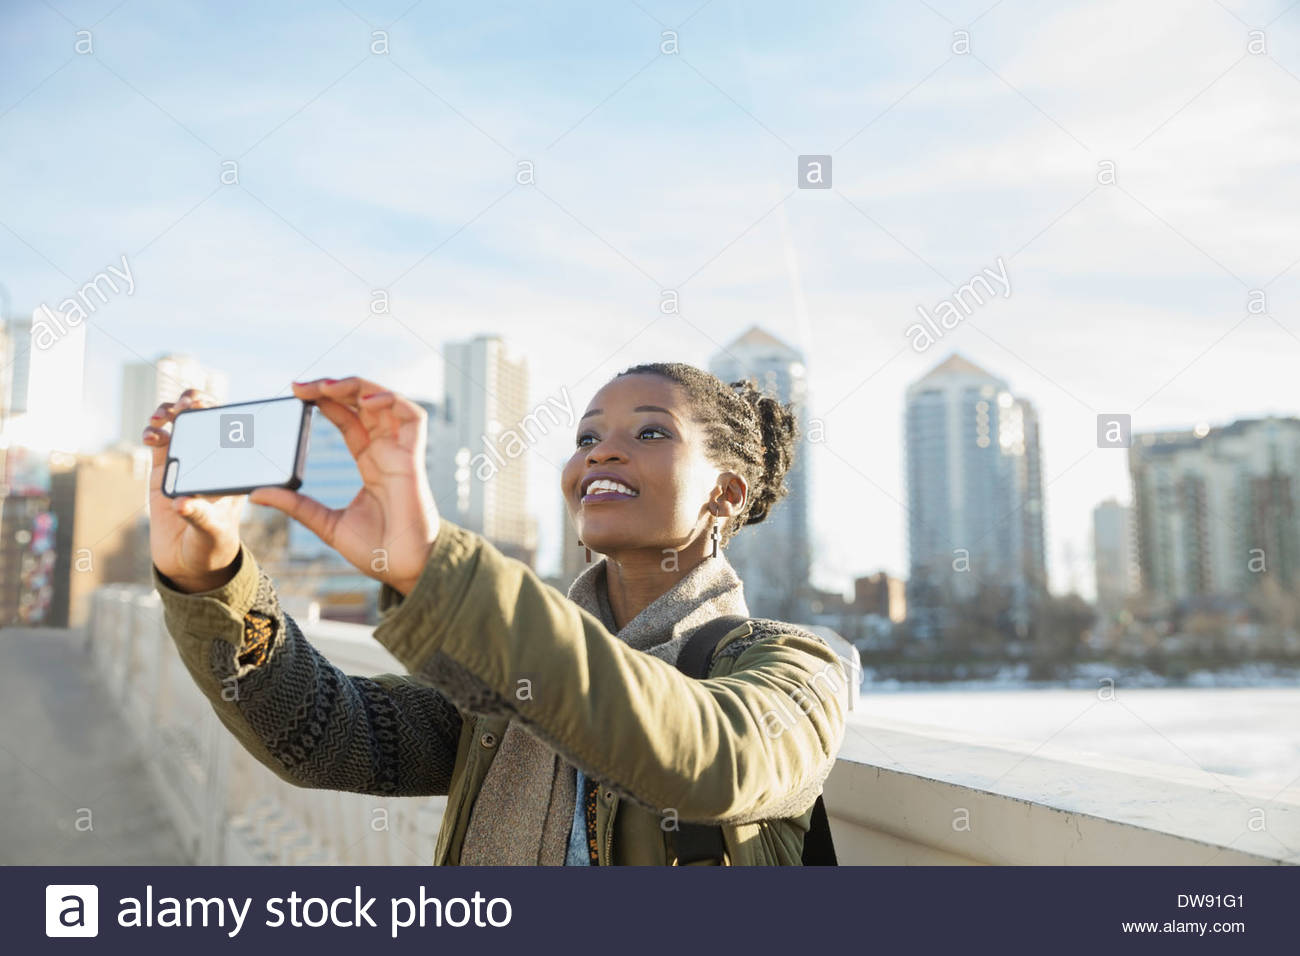 Woman photographing with smart phone outdoors Stock Photo